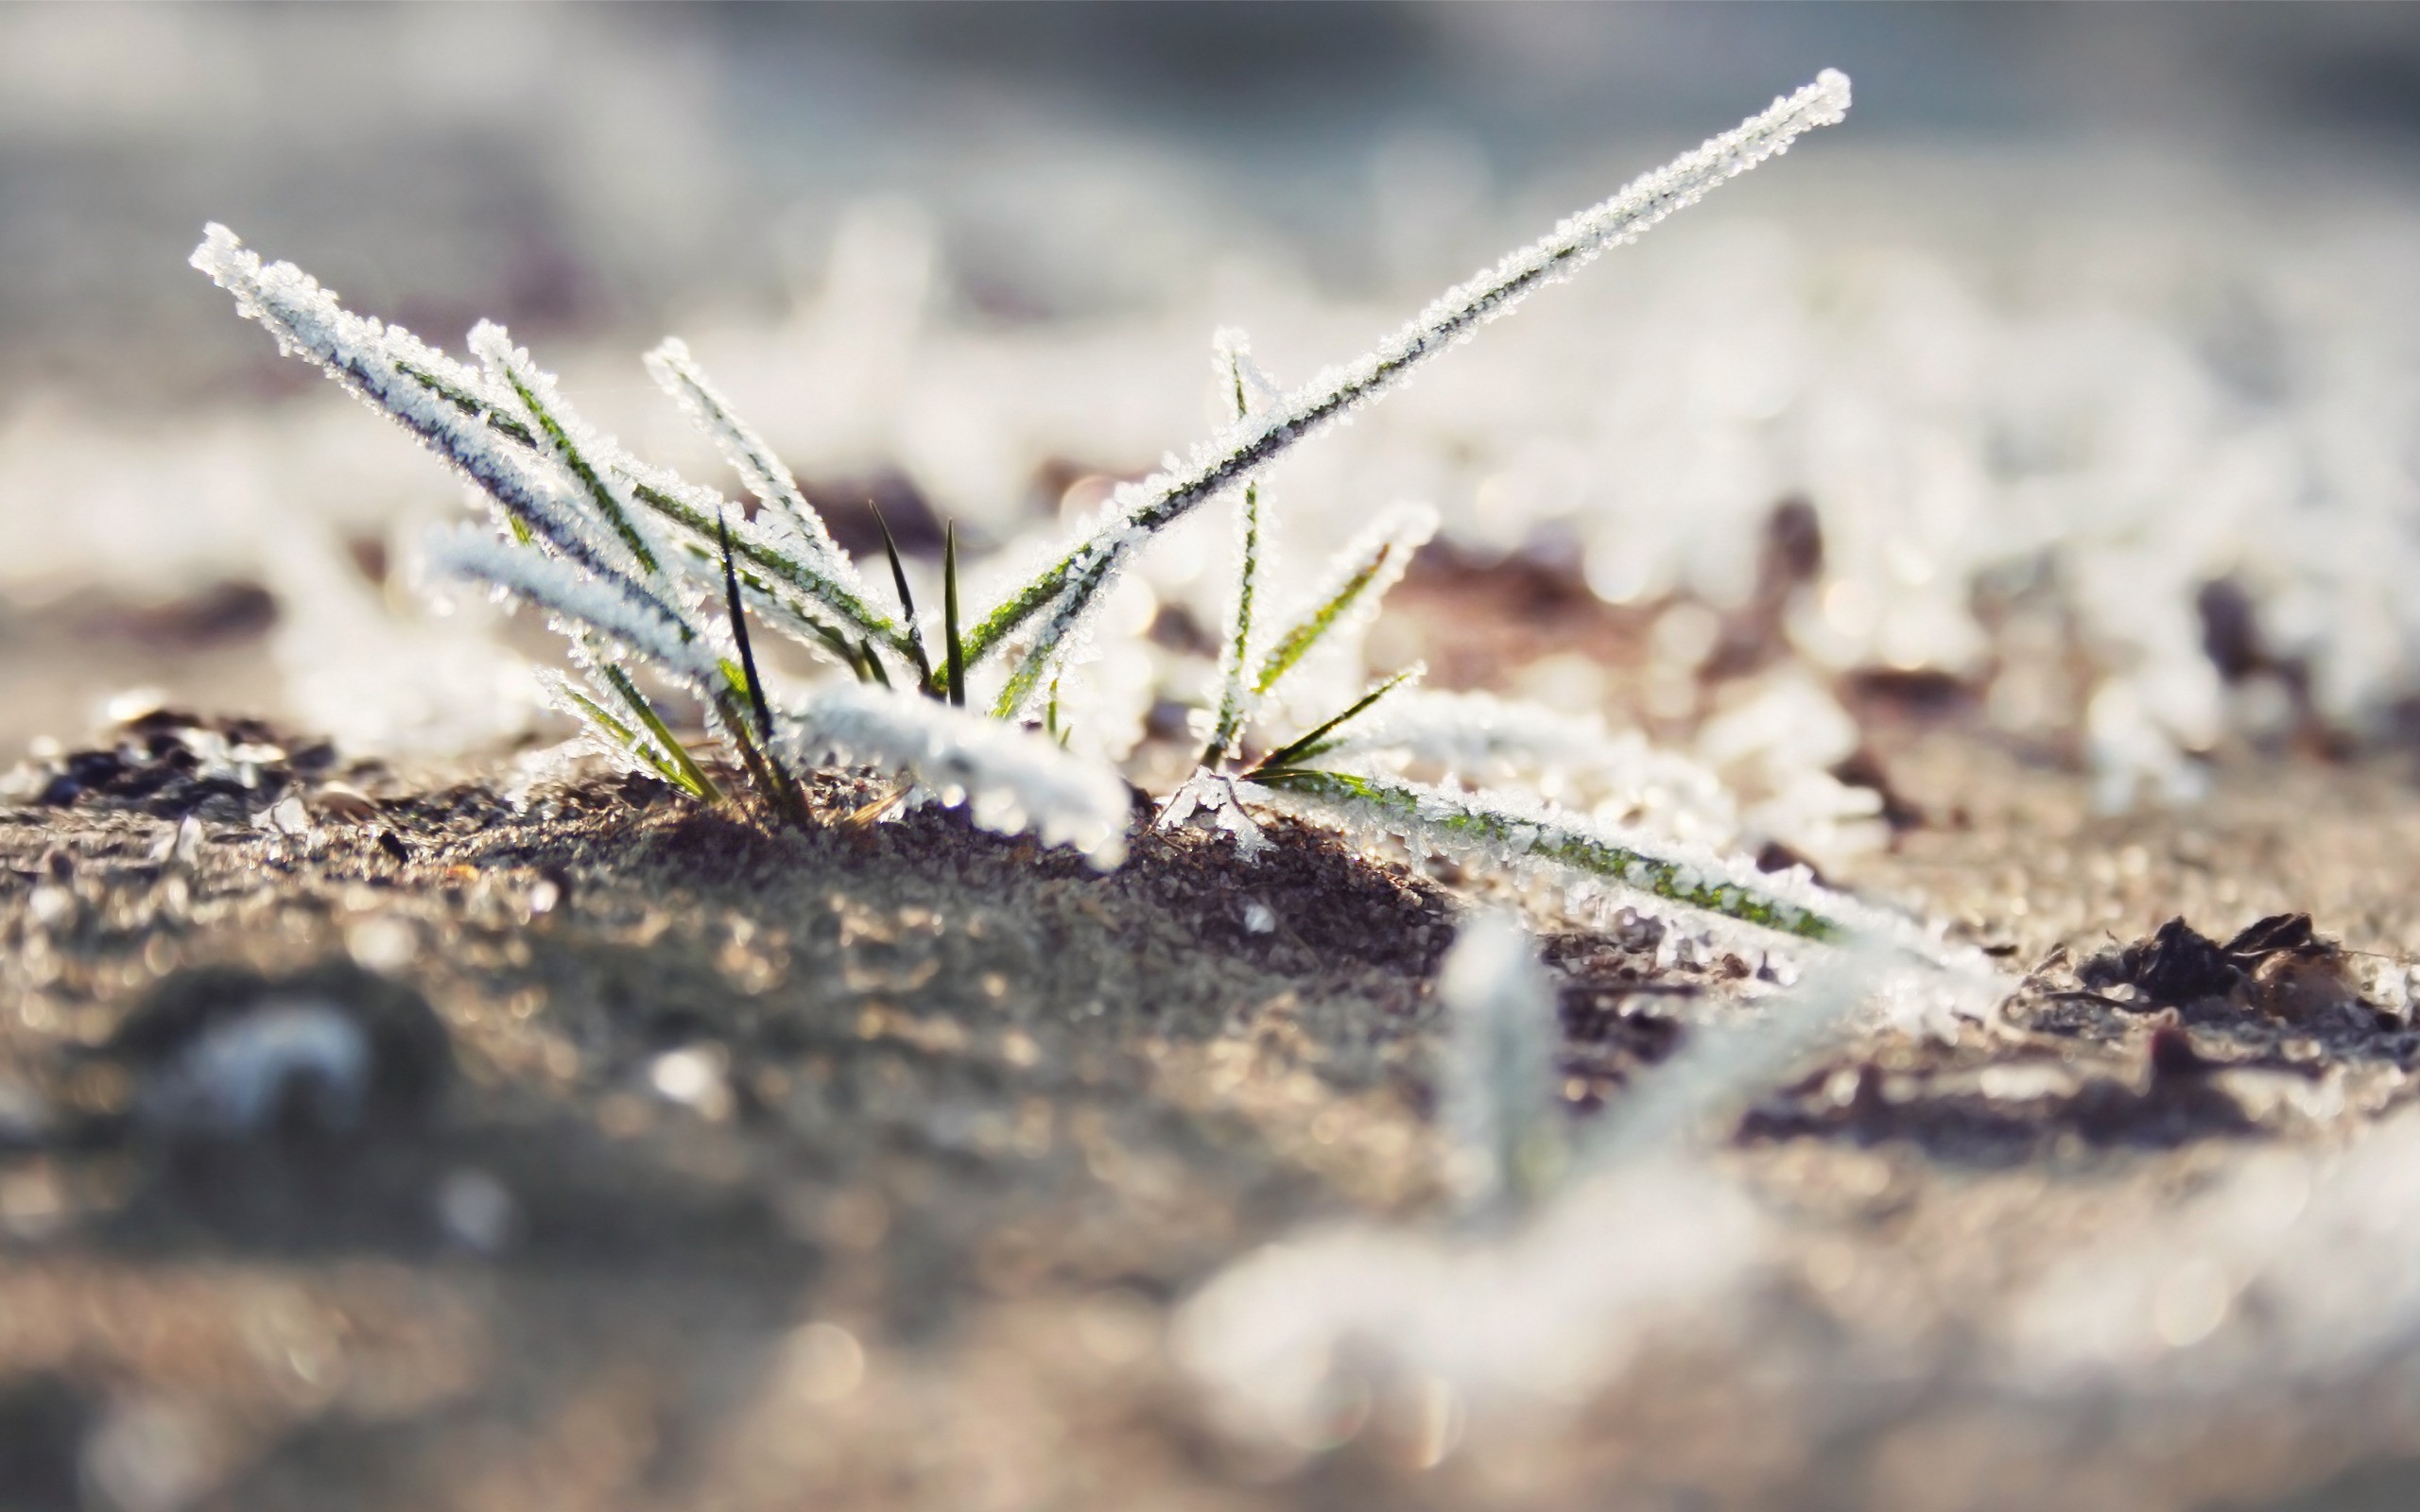 General 2560x1600 ice macro grass nature photography plants